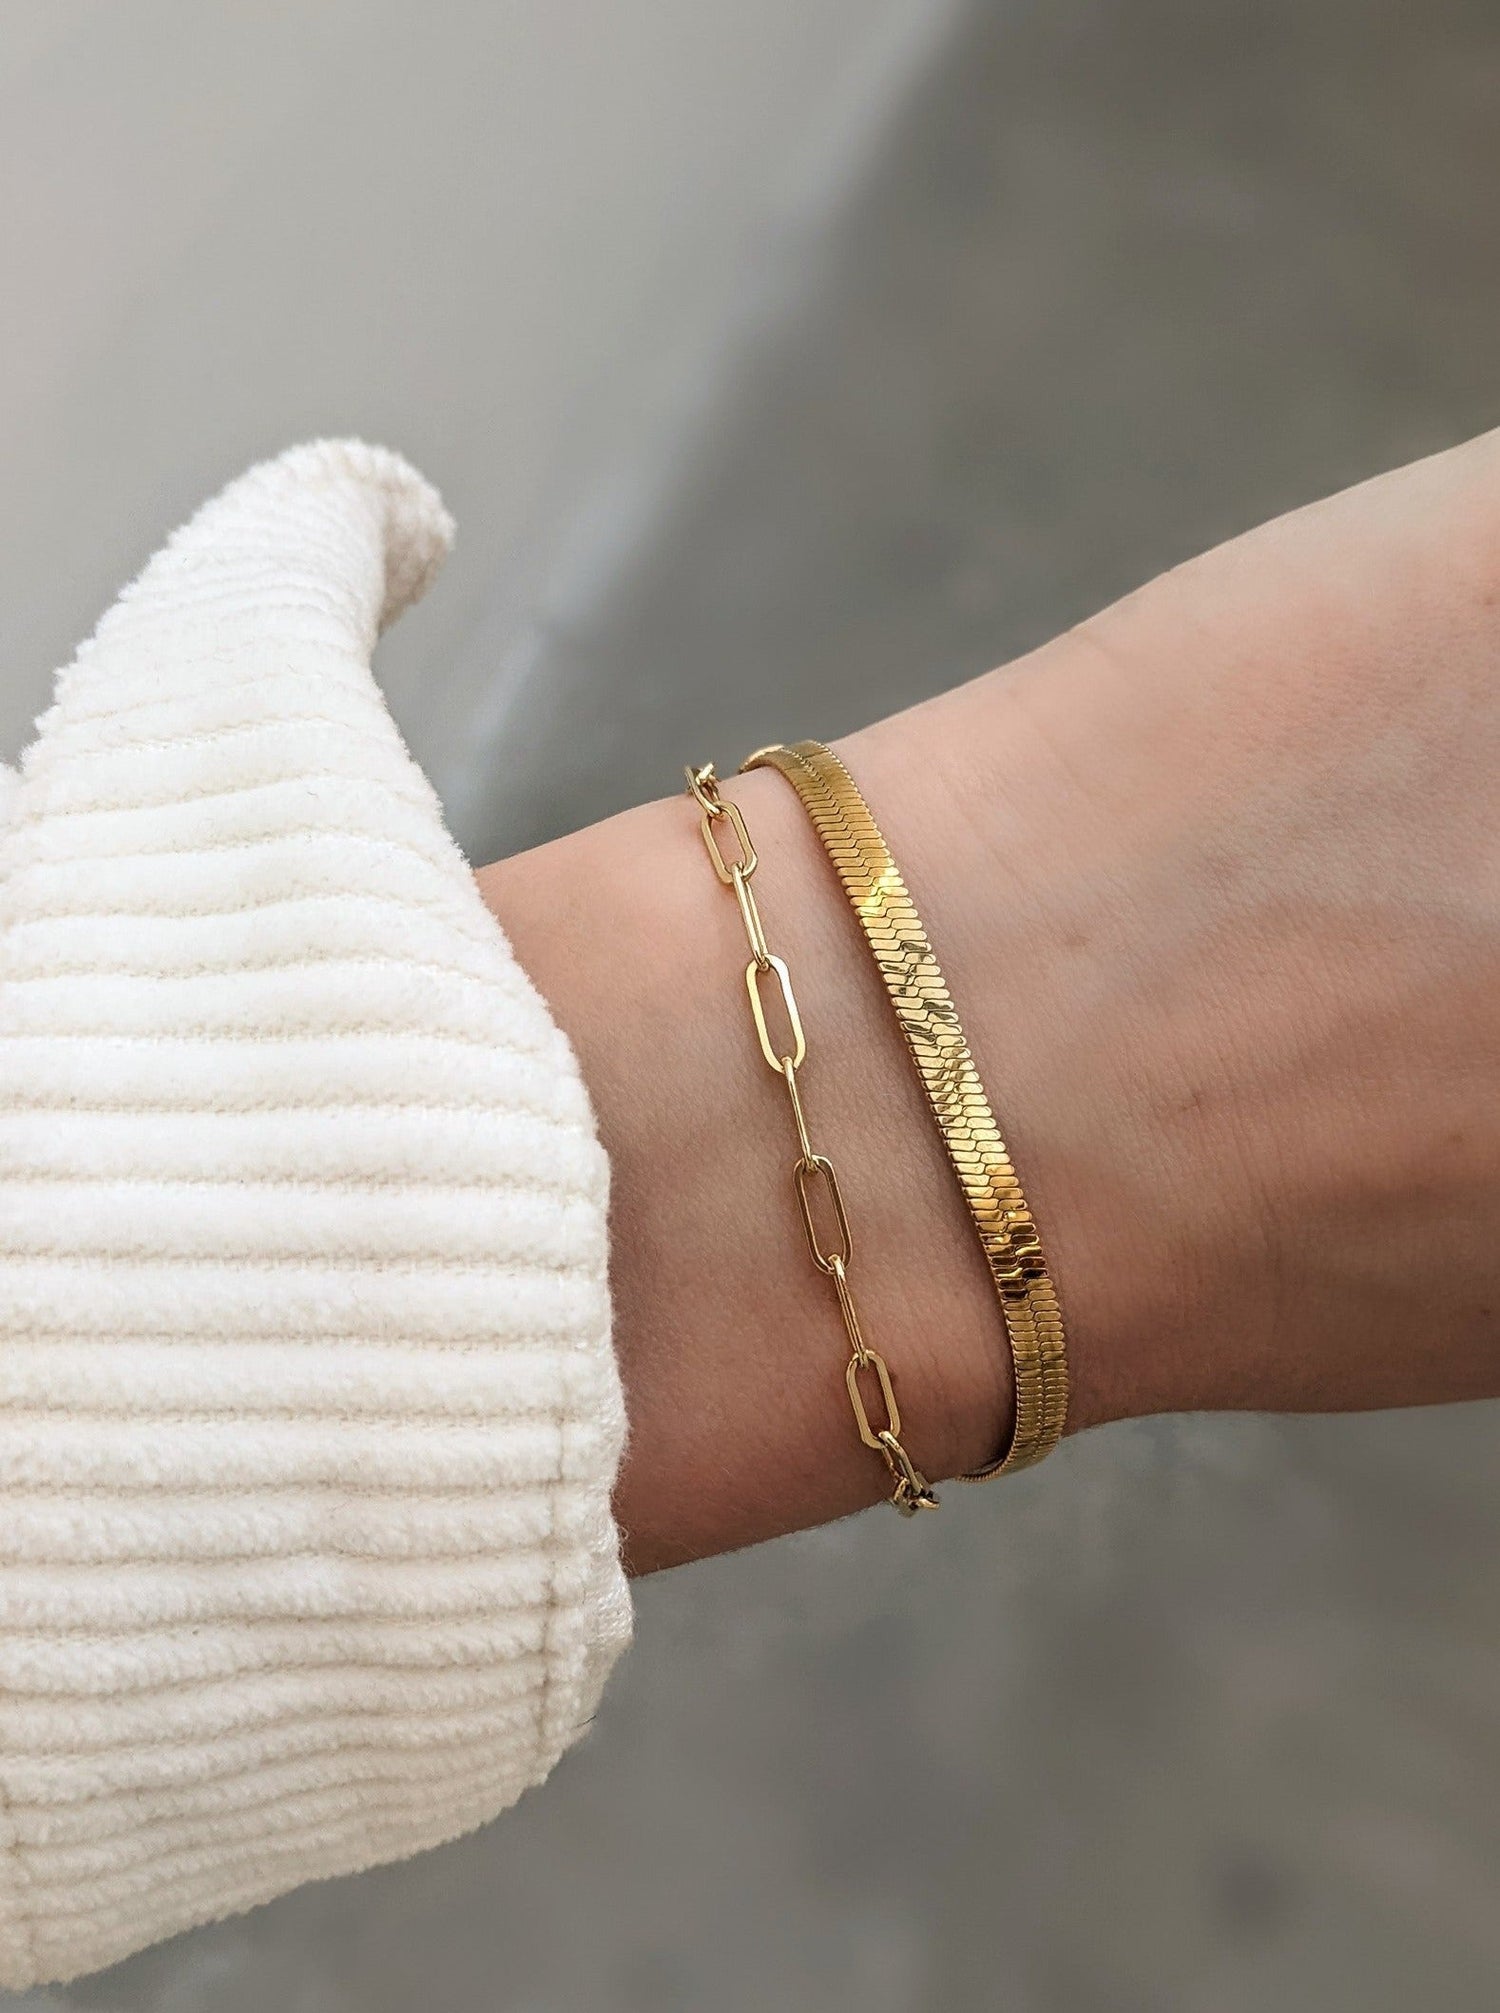 Elongated Paperclip Chain Bracelet Layer the Love